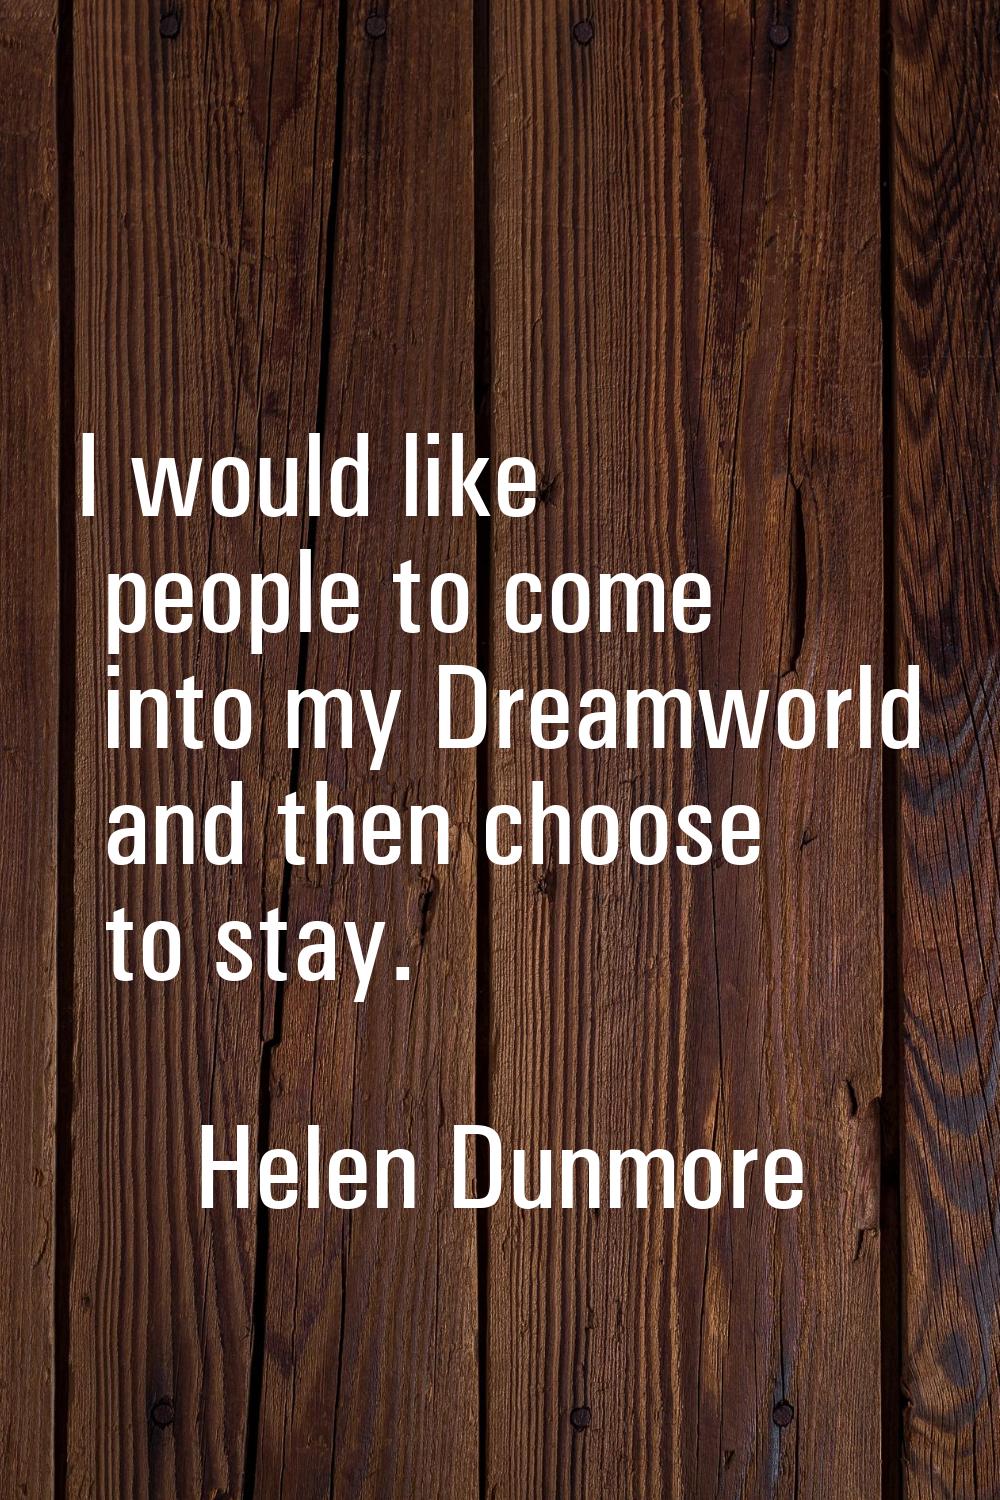 I would like people to come into my Dreamworld and then choose to stay.